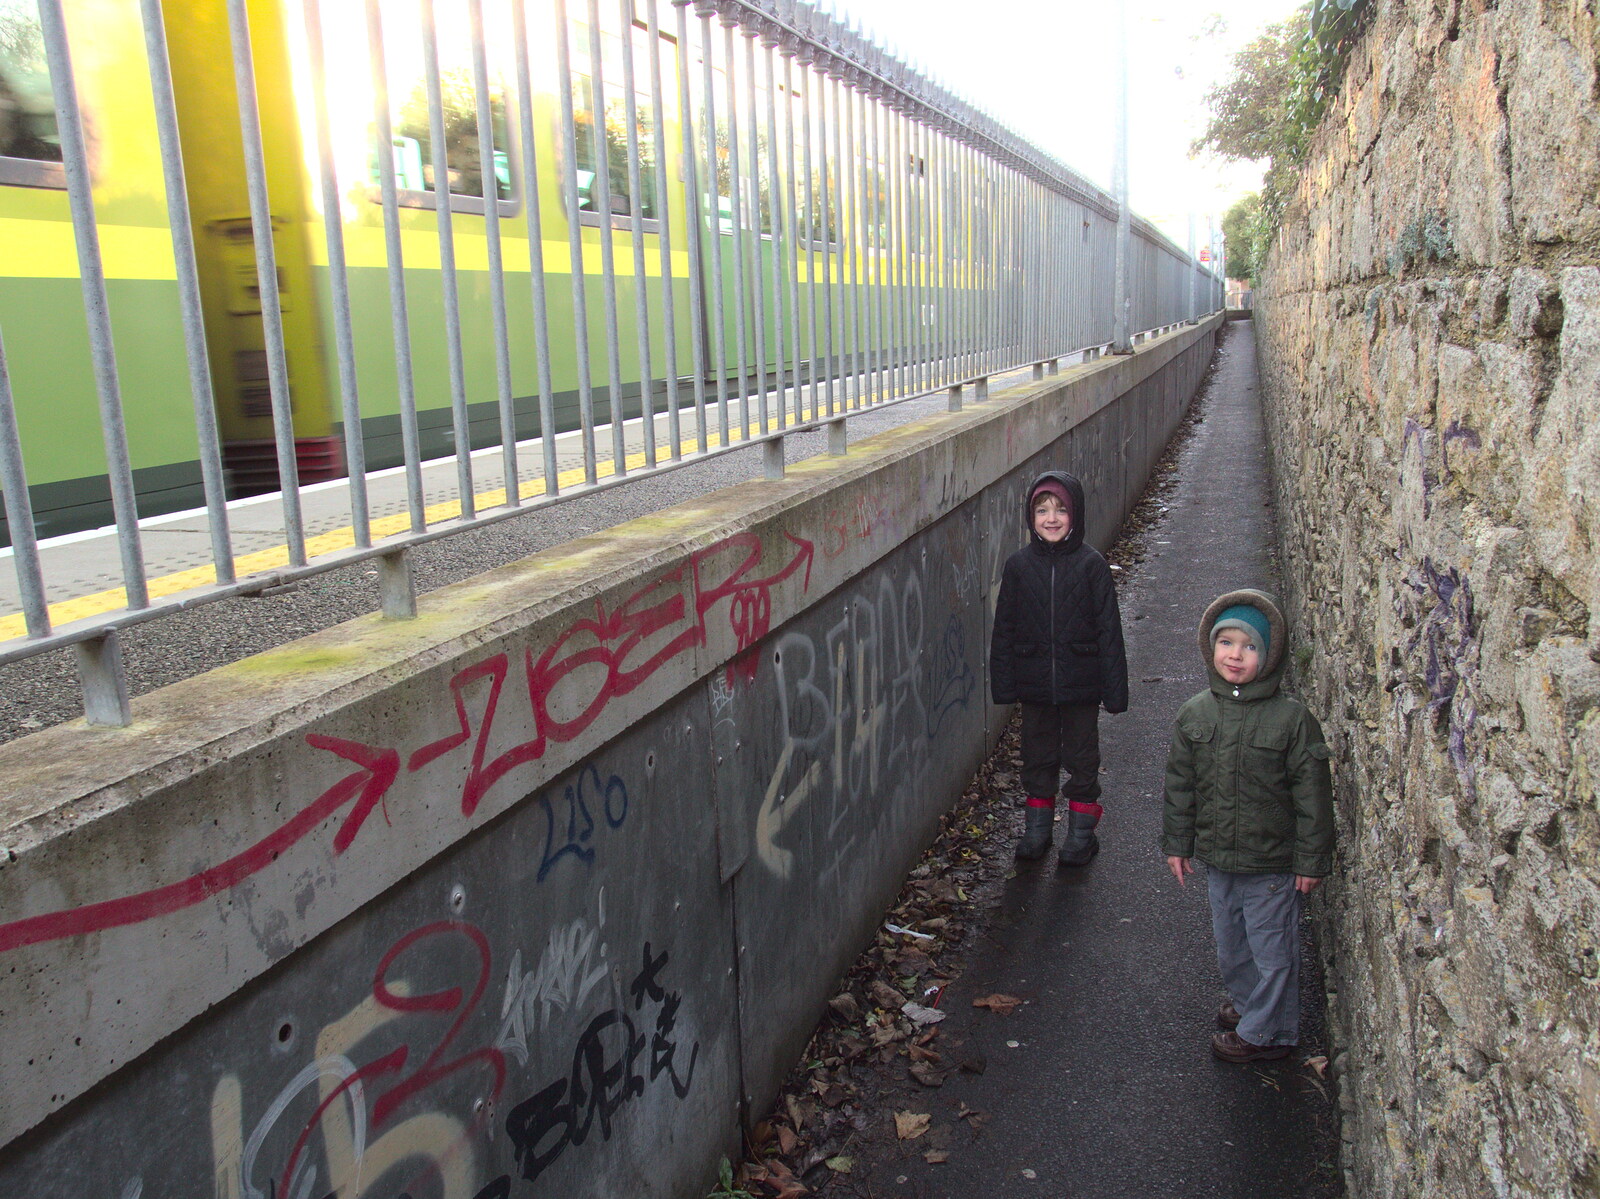 The boys on the path up to Blackrock DART station from Christmas Eve in Dublin and Blackrock, Ireland - 24th December 2015